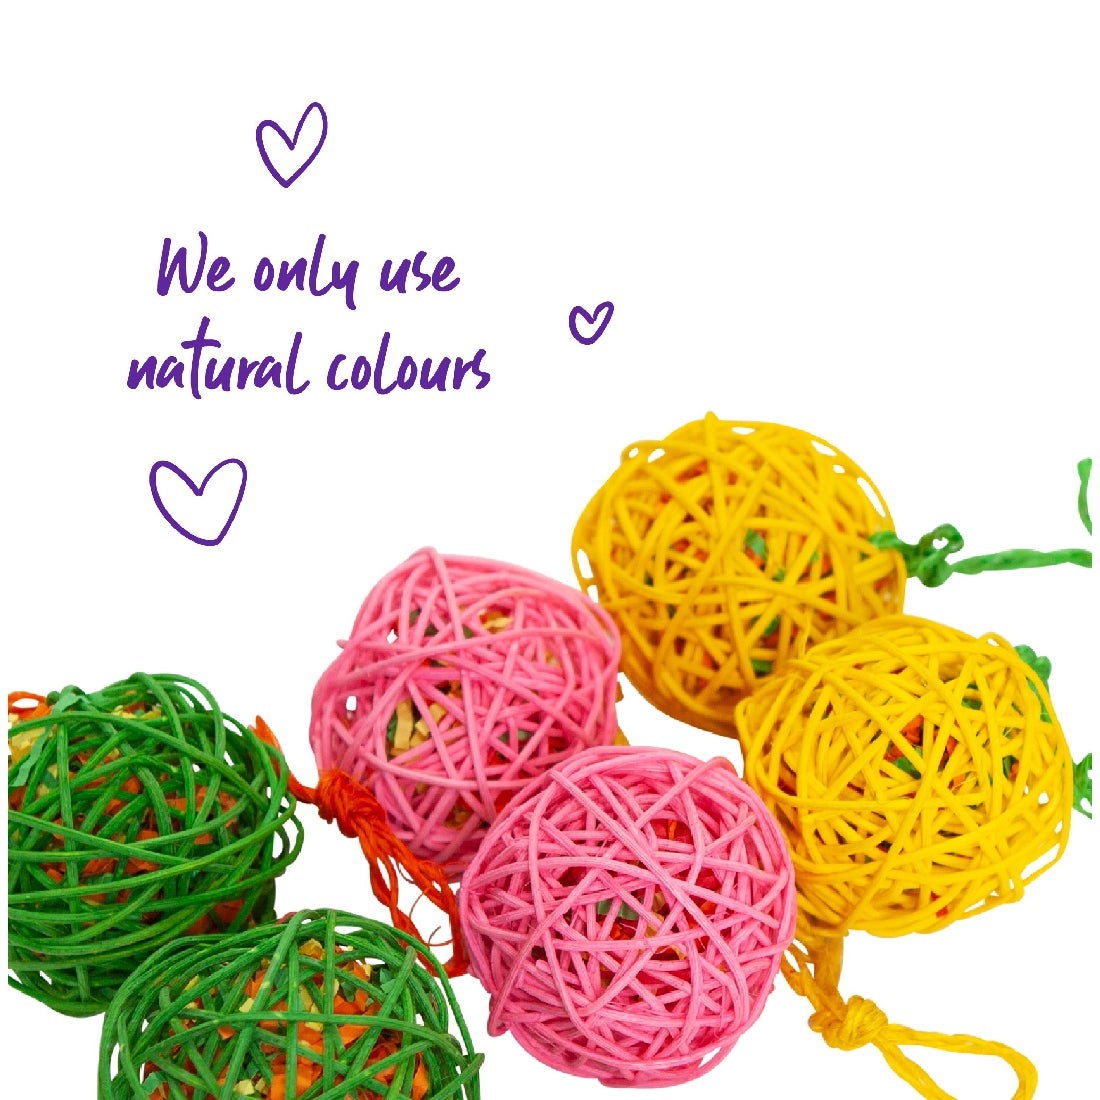 Colorful woven bird toy balls with text 'natural colours'?